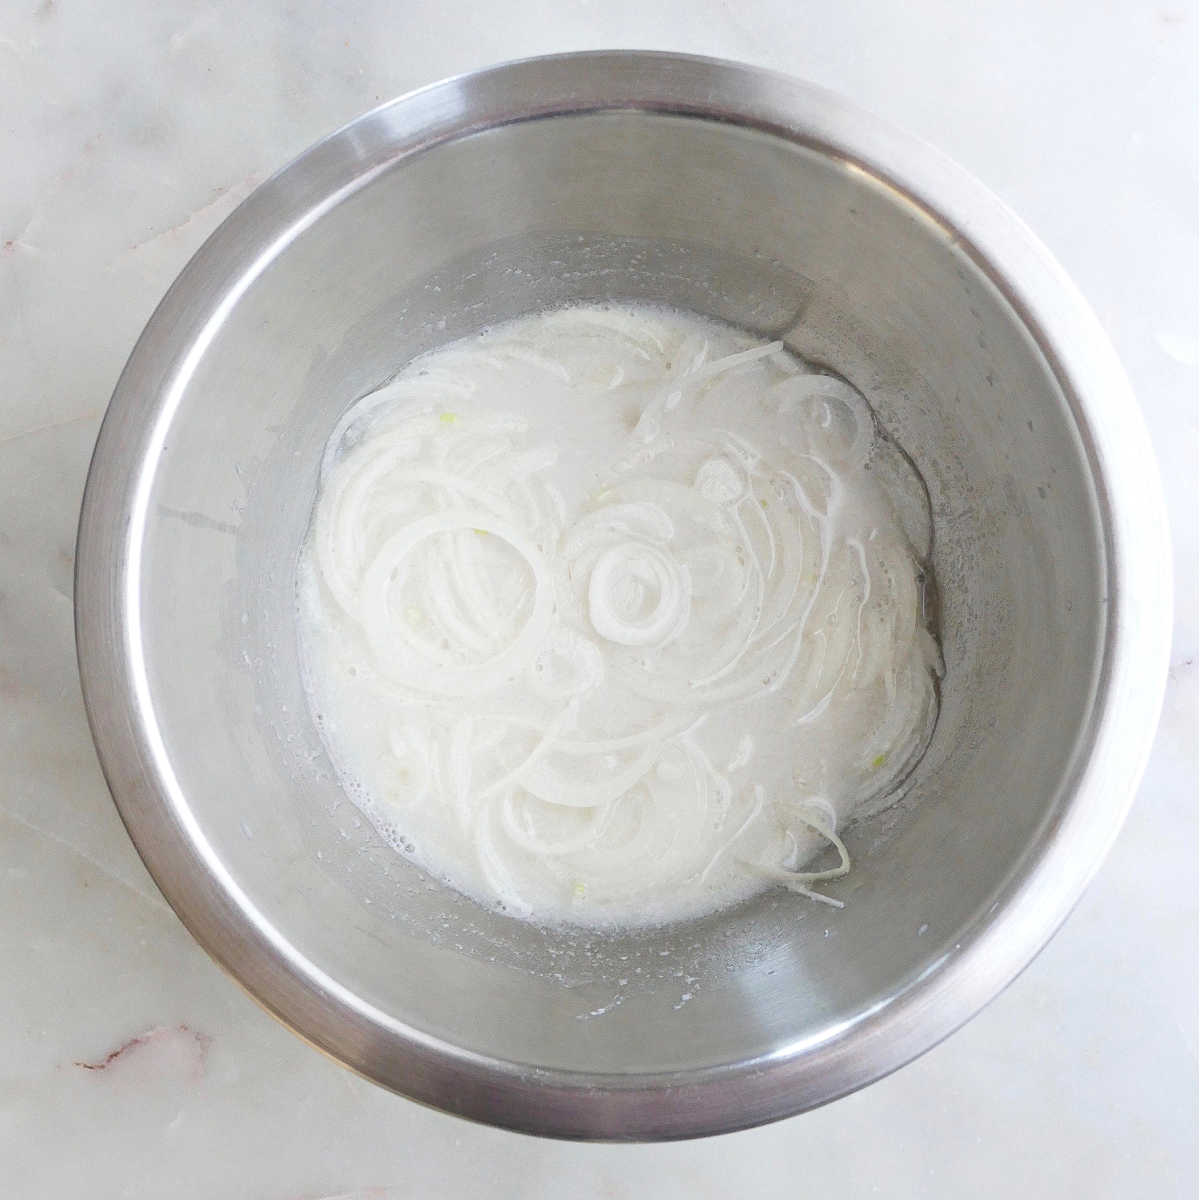 thinly sliced onions soaking in almond milk and vinegar in a bowl